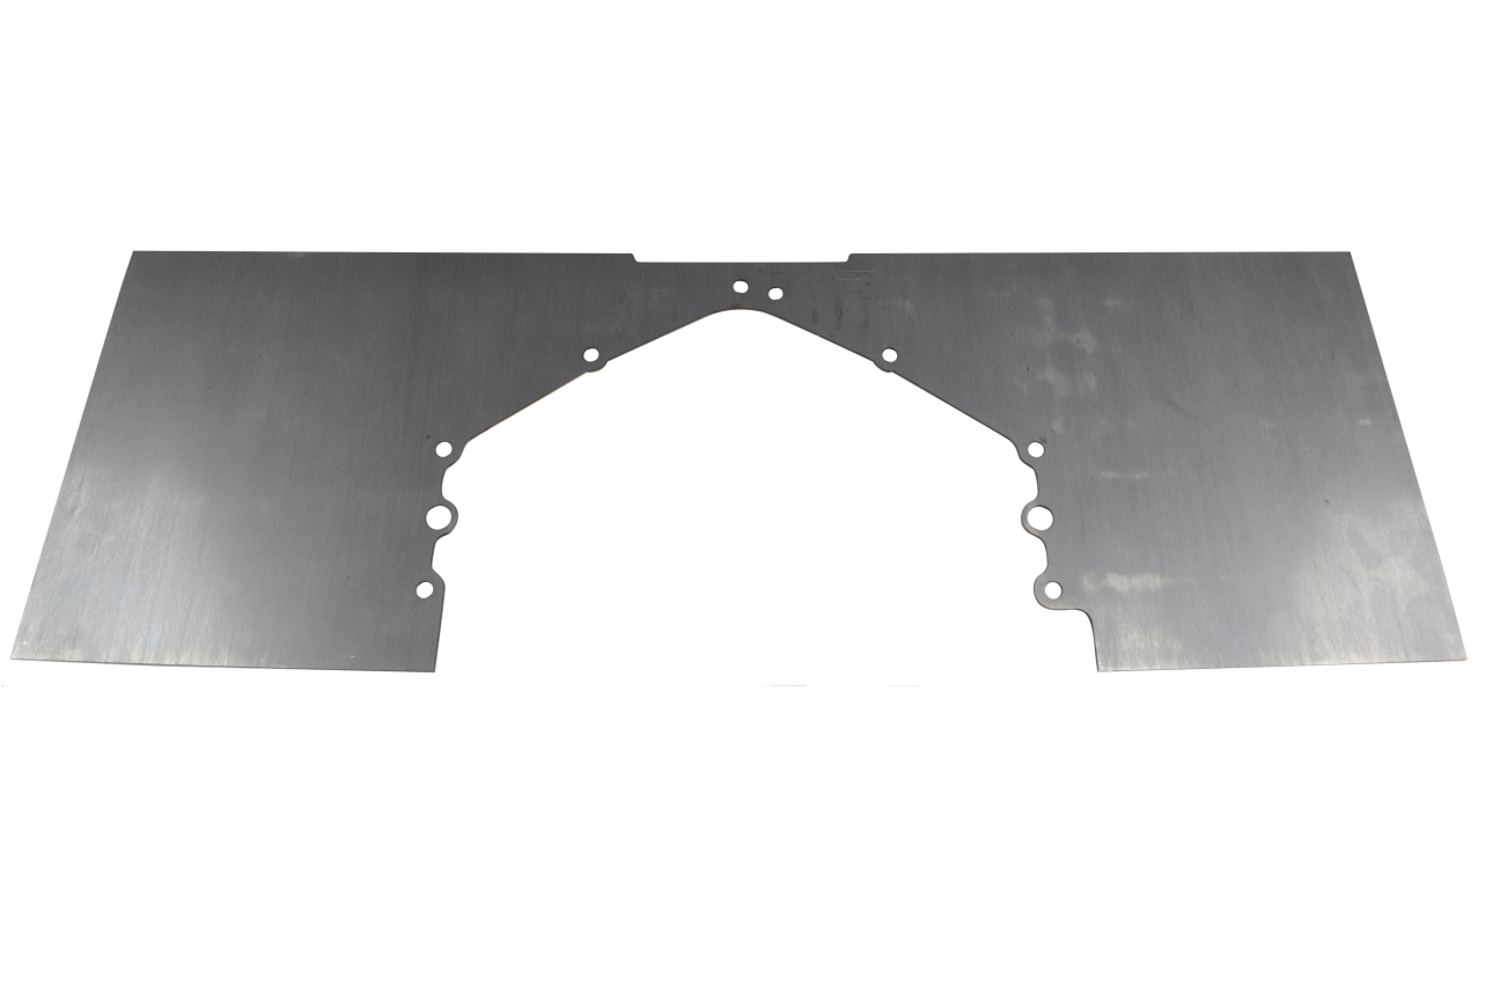 ICT Billet 551809 Motor Plate, Middle, Cut to Fit, 36 x 12 x 1/8 in, Aluminum, Natural, GM V8, Each